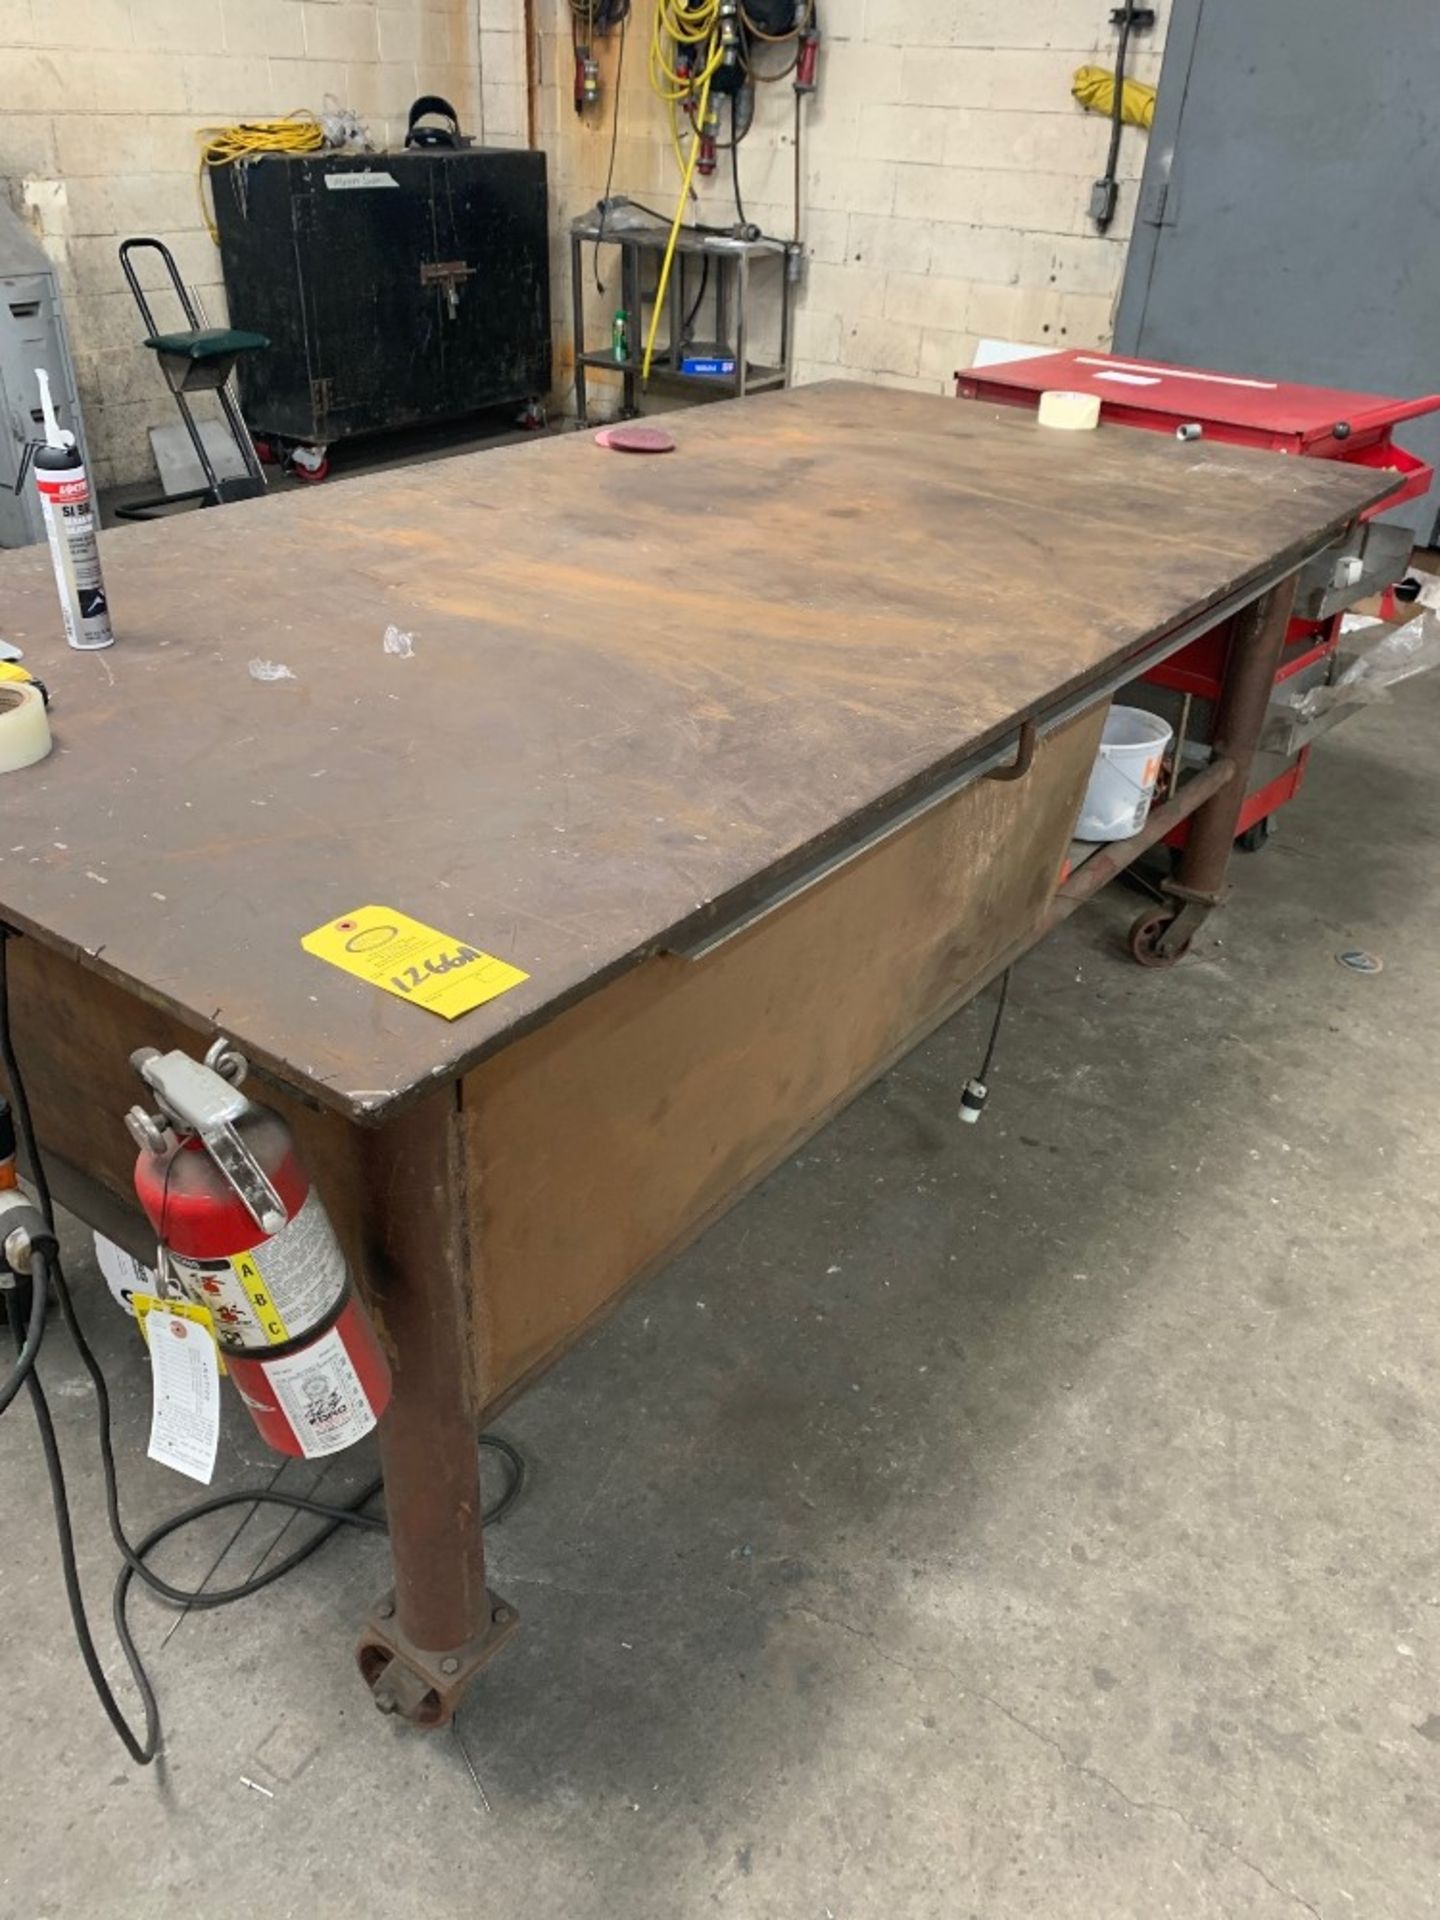 Welding Table, 3/4" steel top, 4' W X 8' L, portable on wheels: Required Loading Fee $150.00, - Image 3 of 3